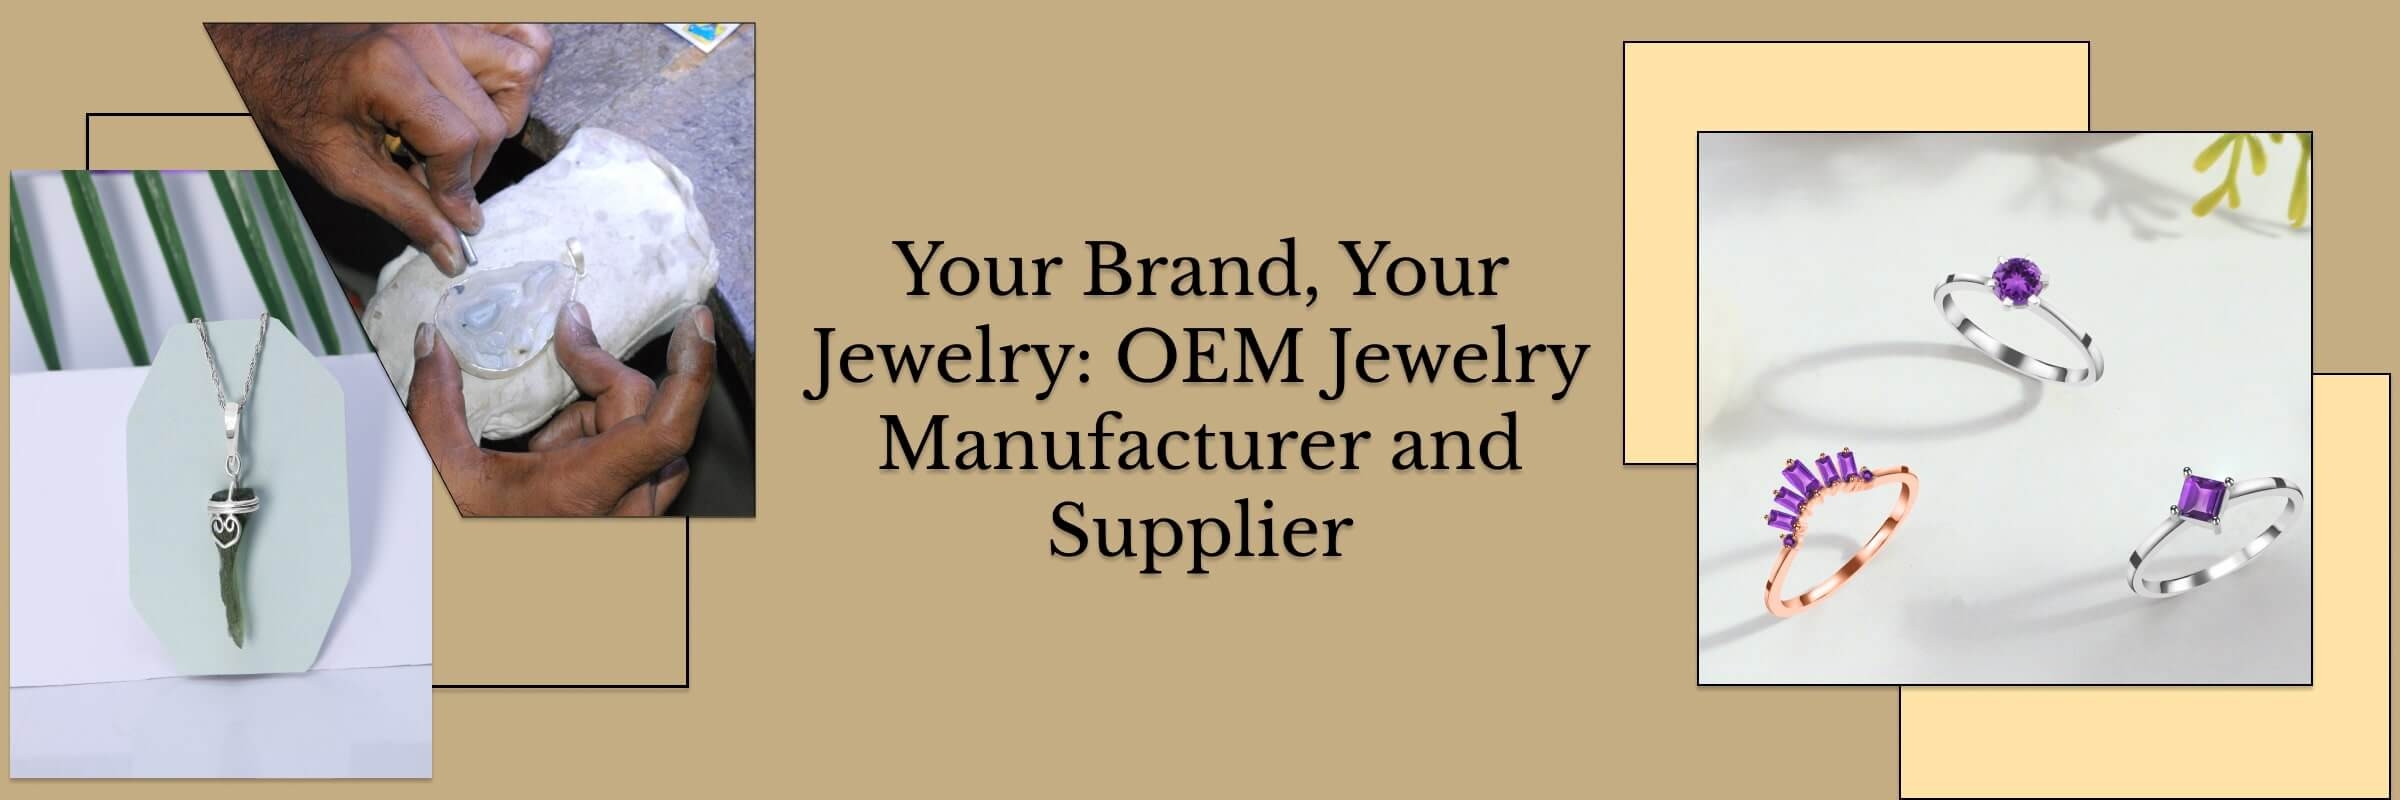 OEM Jewelry Manufacturer and Supplier